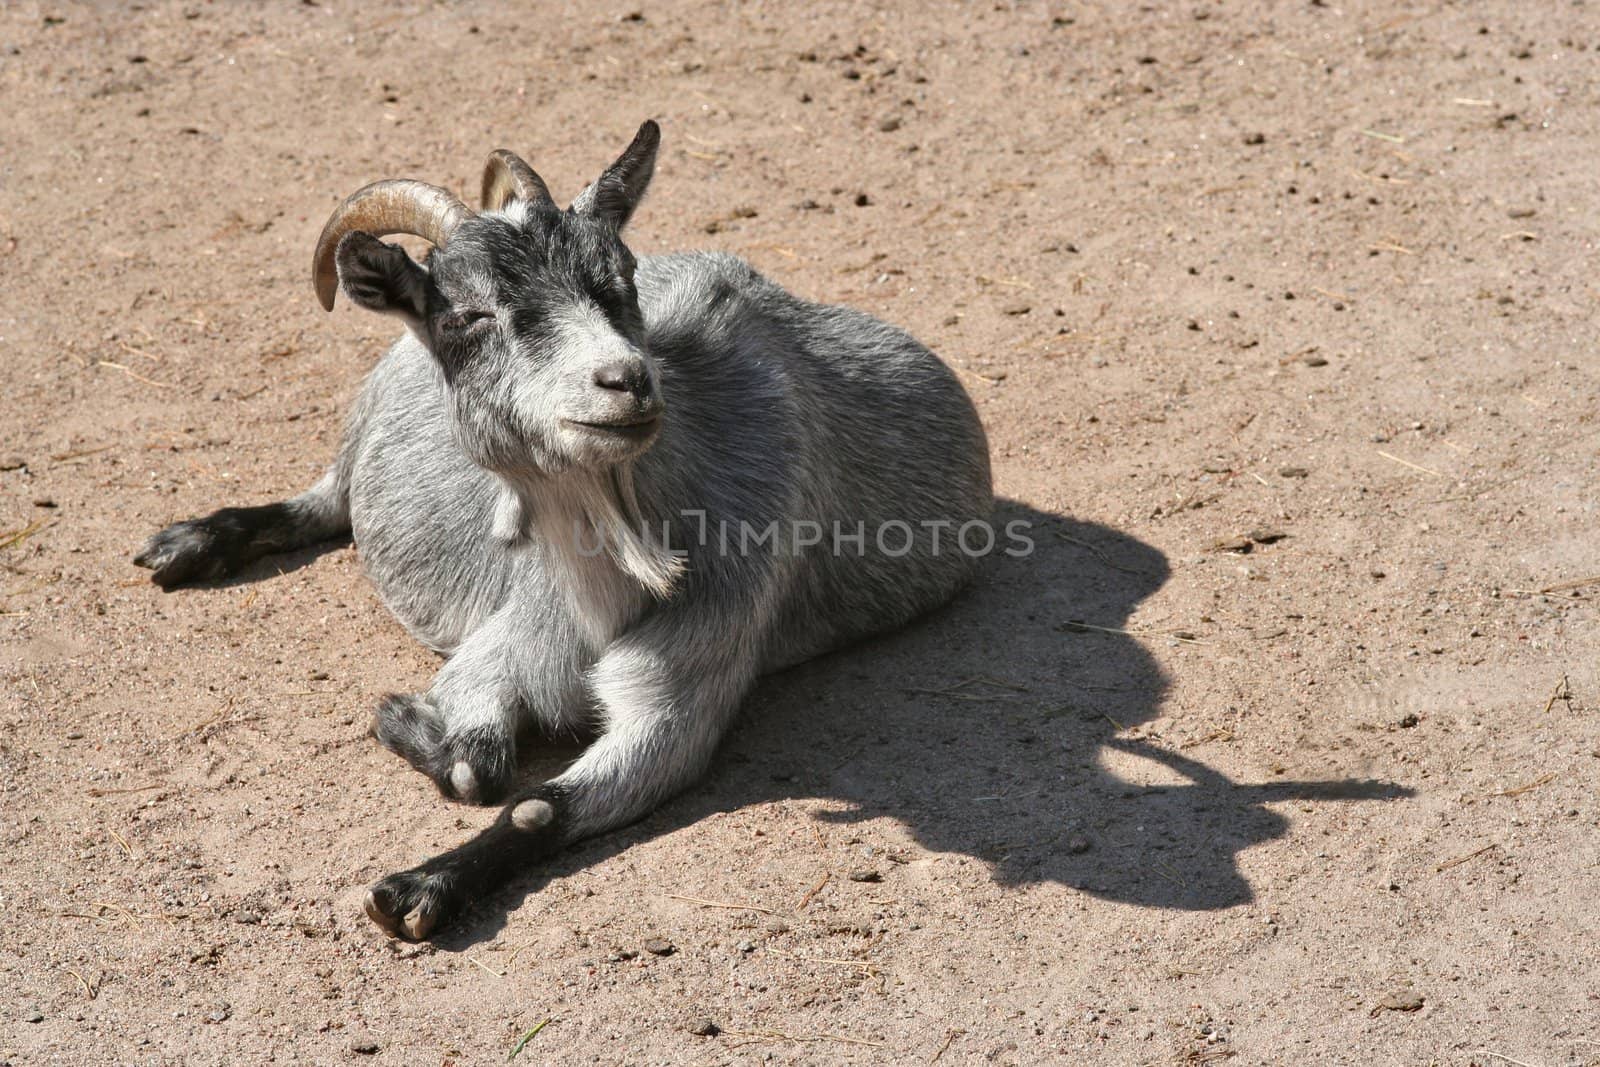 This goat seem to be very happy and content with life!